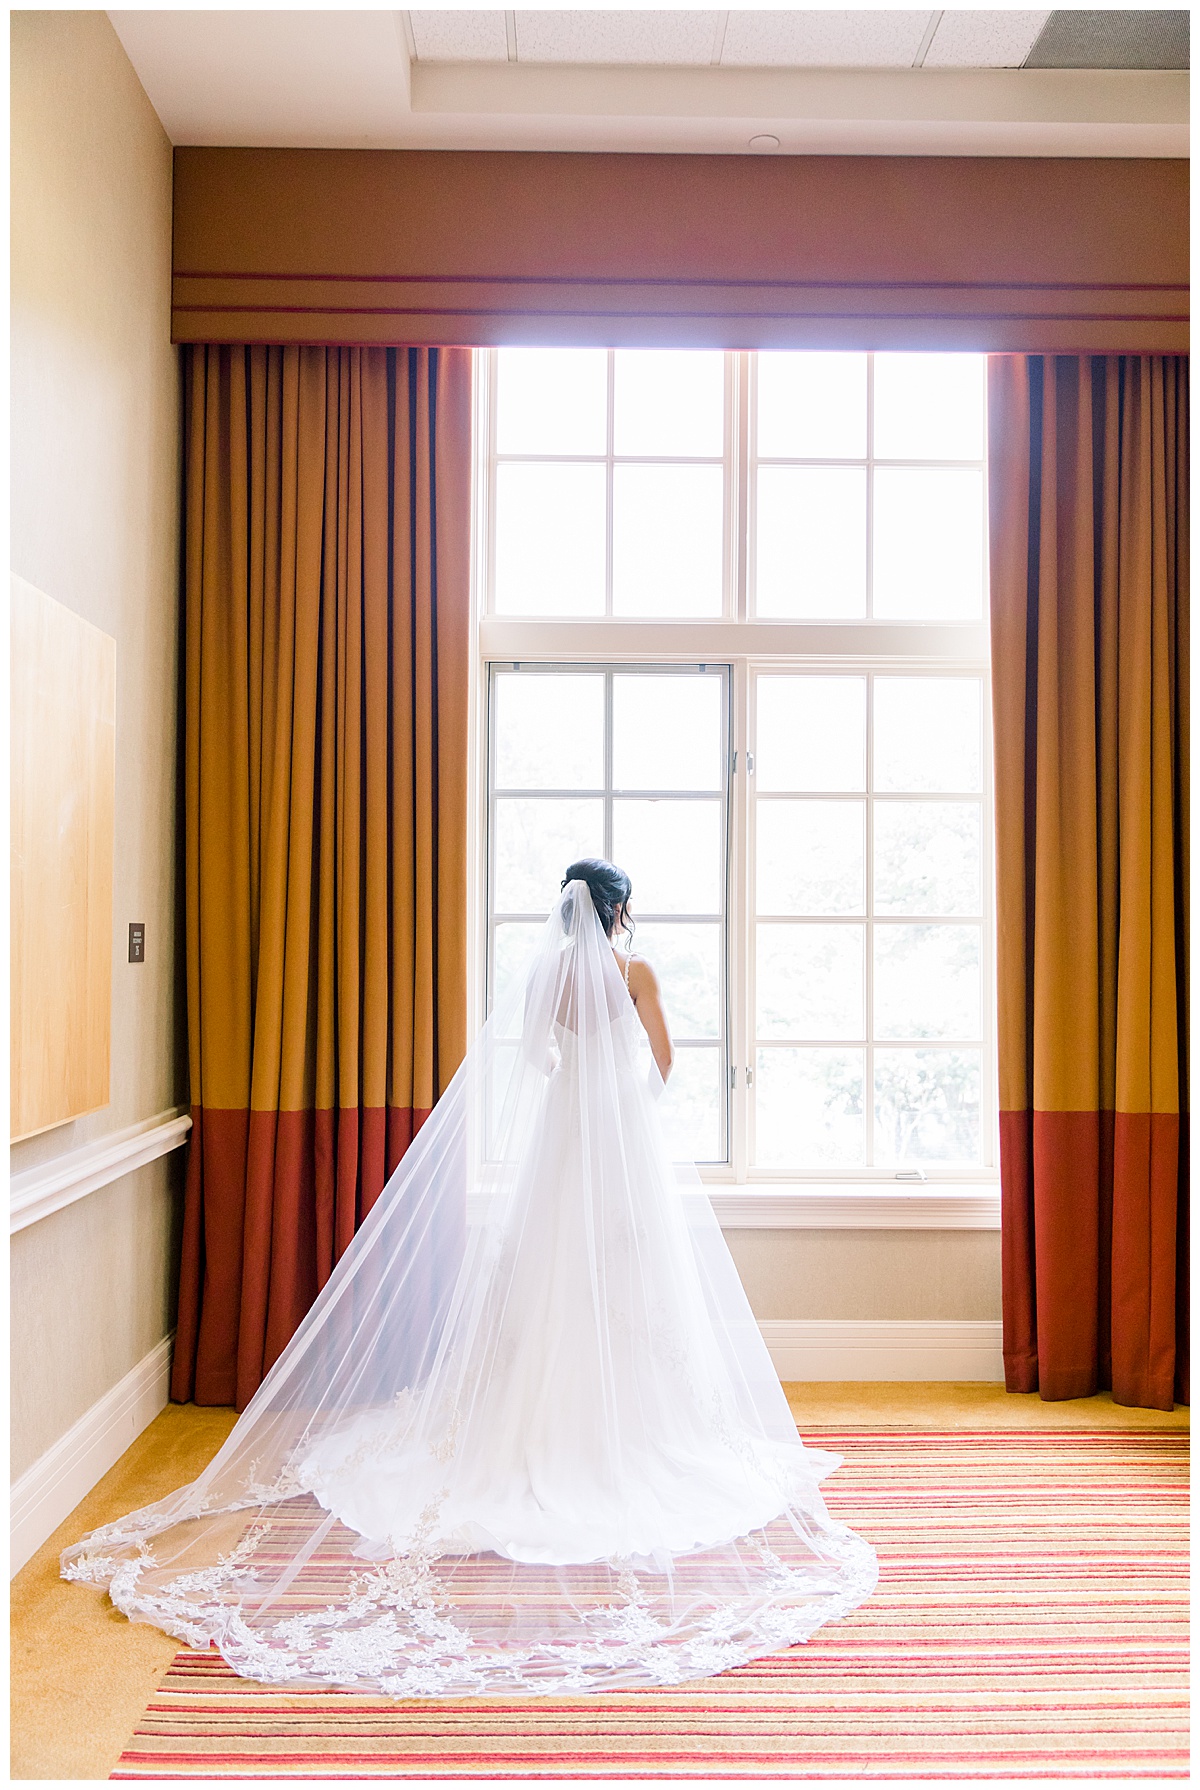 Bride standing in front of large window in the lighting with veil and train flowing out behind her at Hyatt Regency Hill Country Resort Wedding in San Antonio, TX | San Antonio Wedding photographer| Destination Wedding Photographer| Monica Roberts Photography | monicaroberts.com